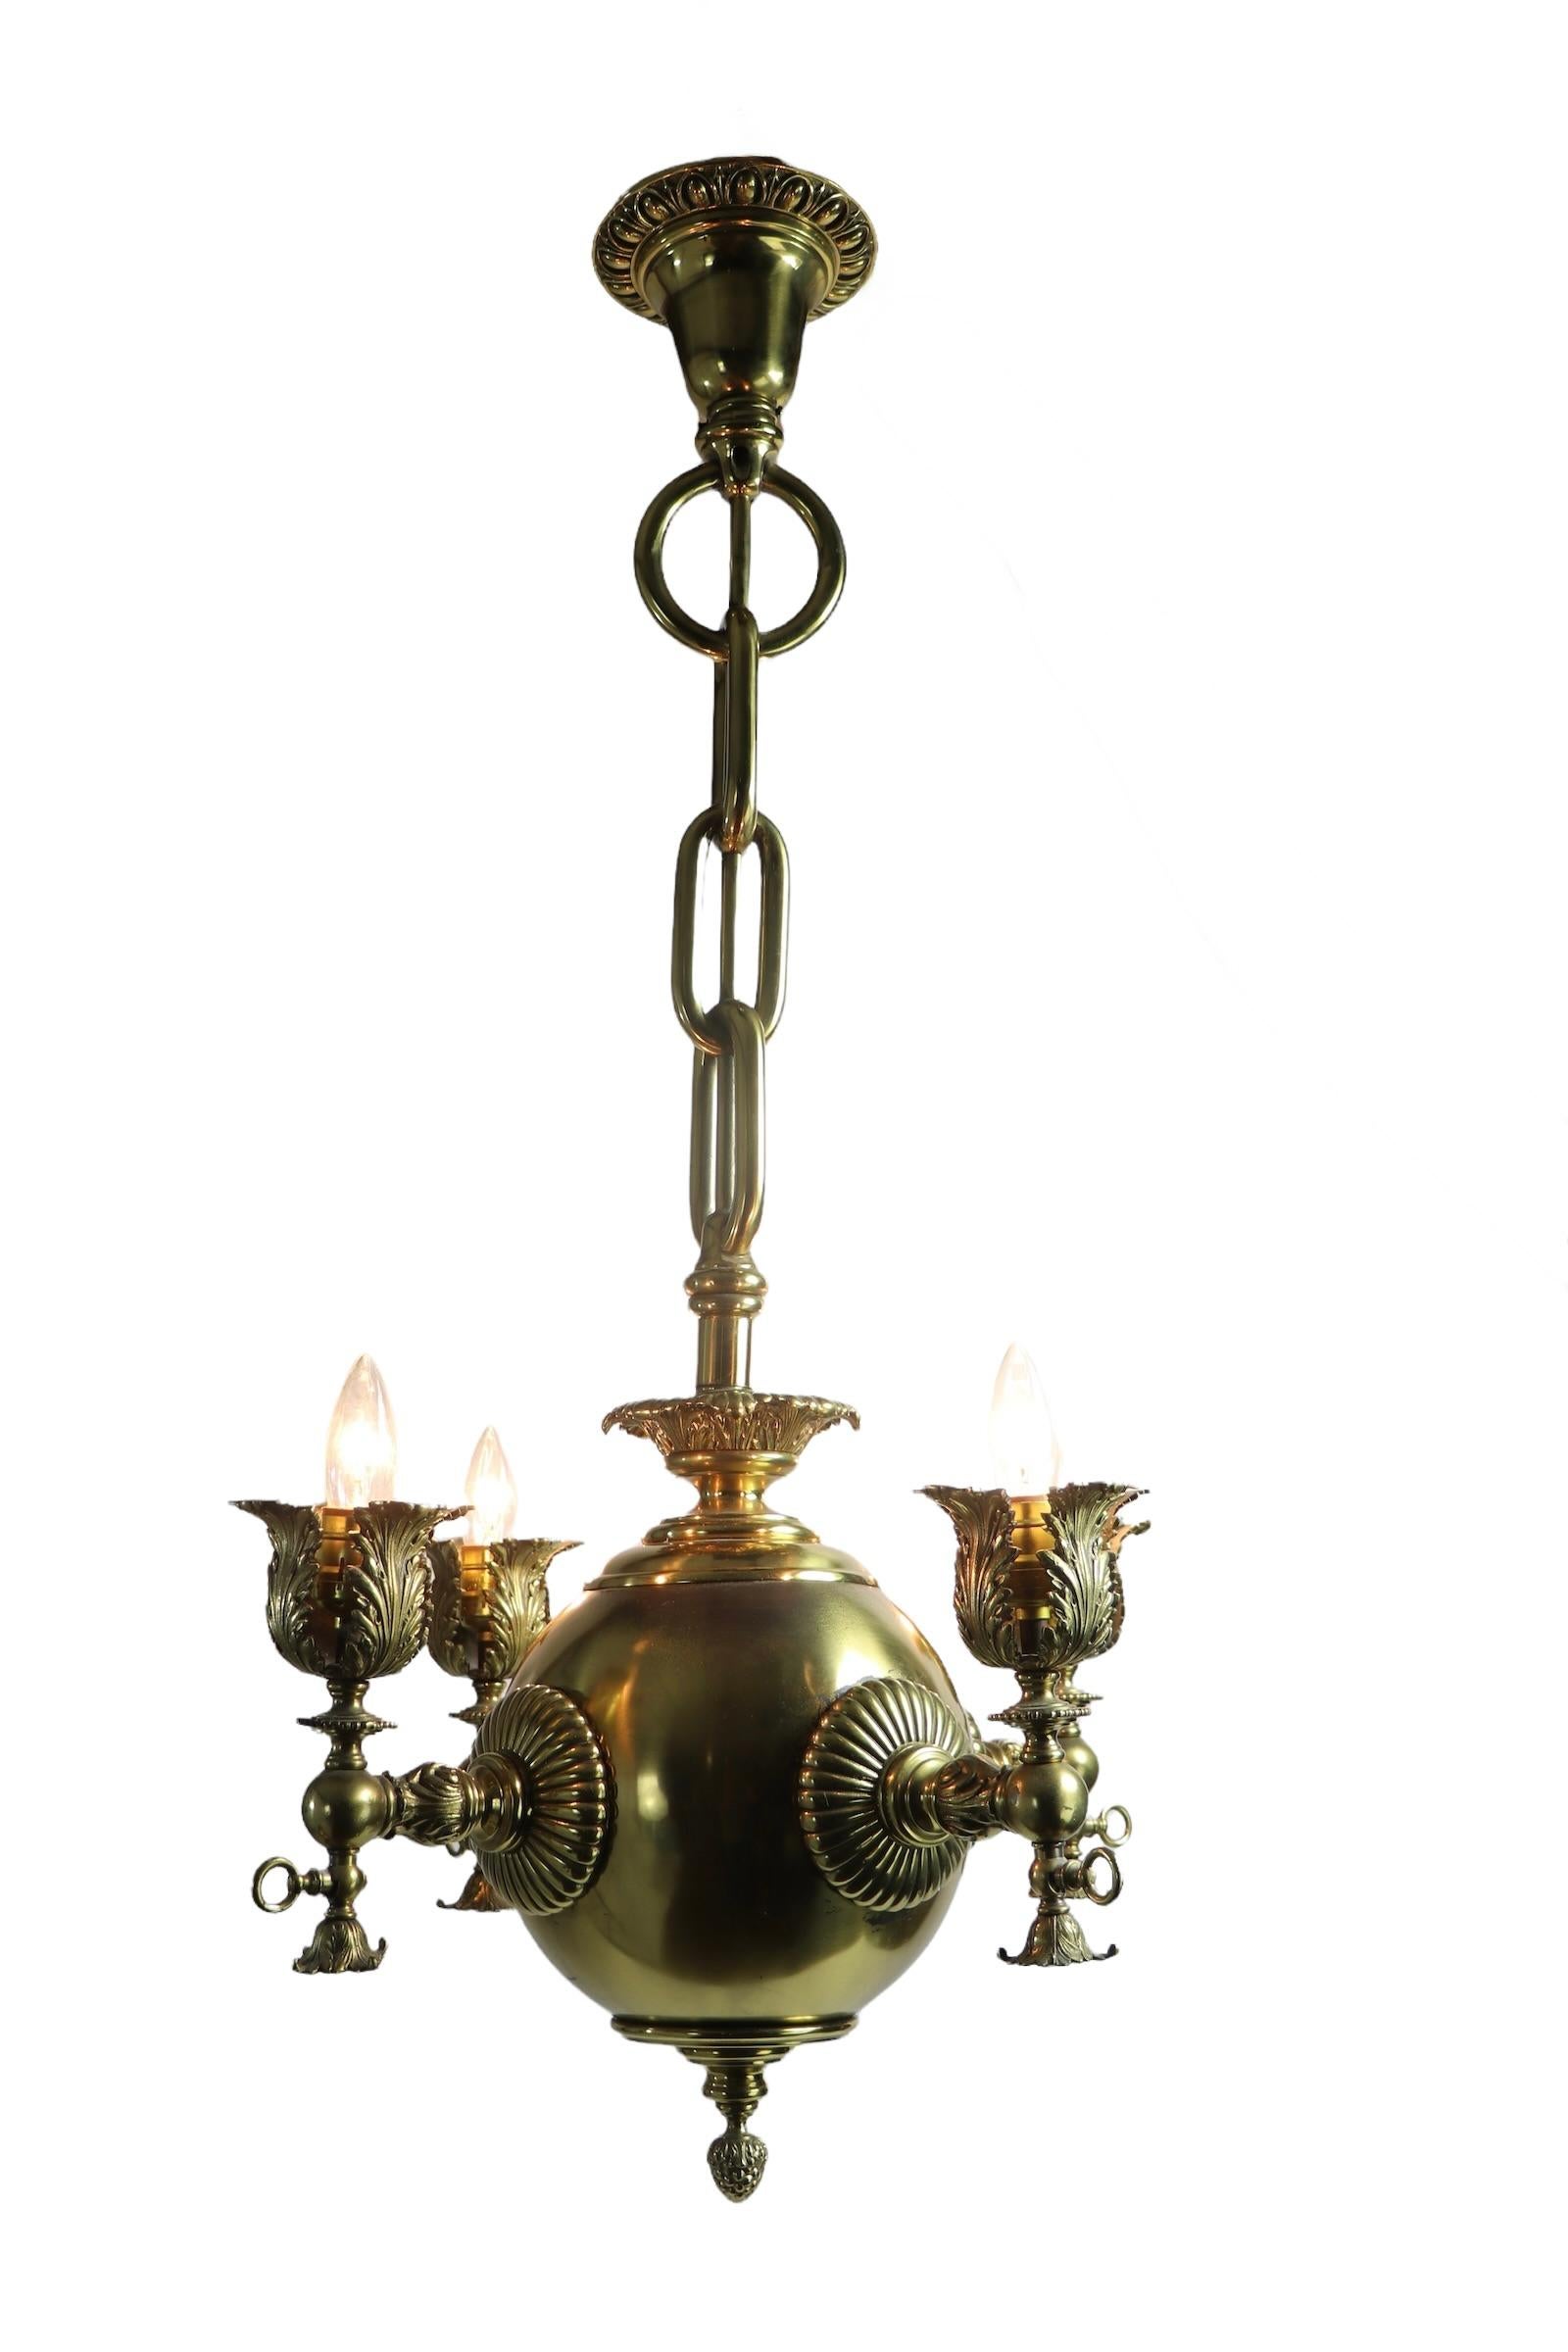 Brass Four Light Electrified Gas Fixture 19th C Made in Usa In Good Condition For Sale In New York, NY